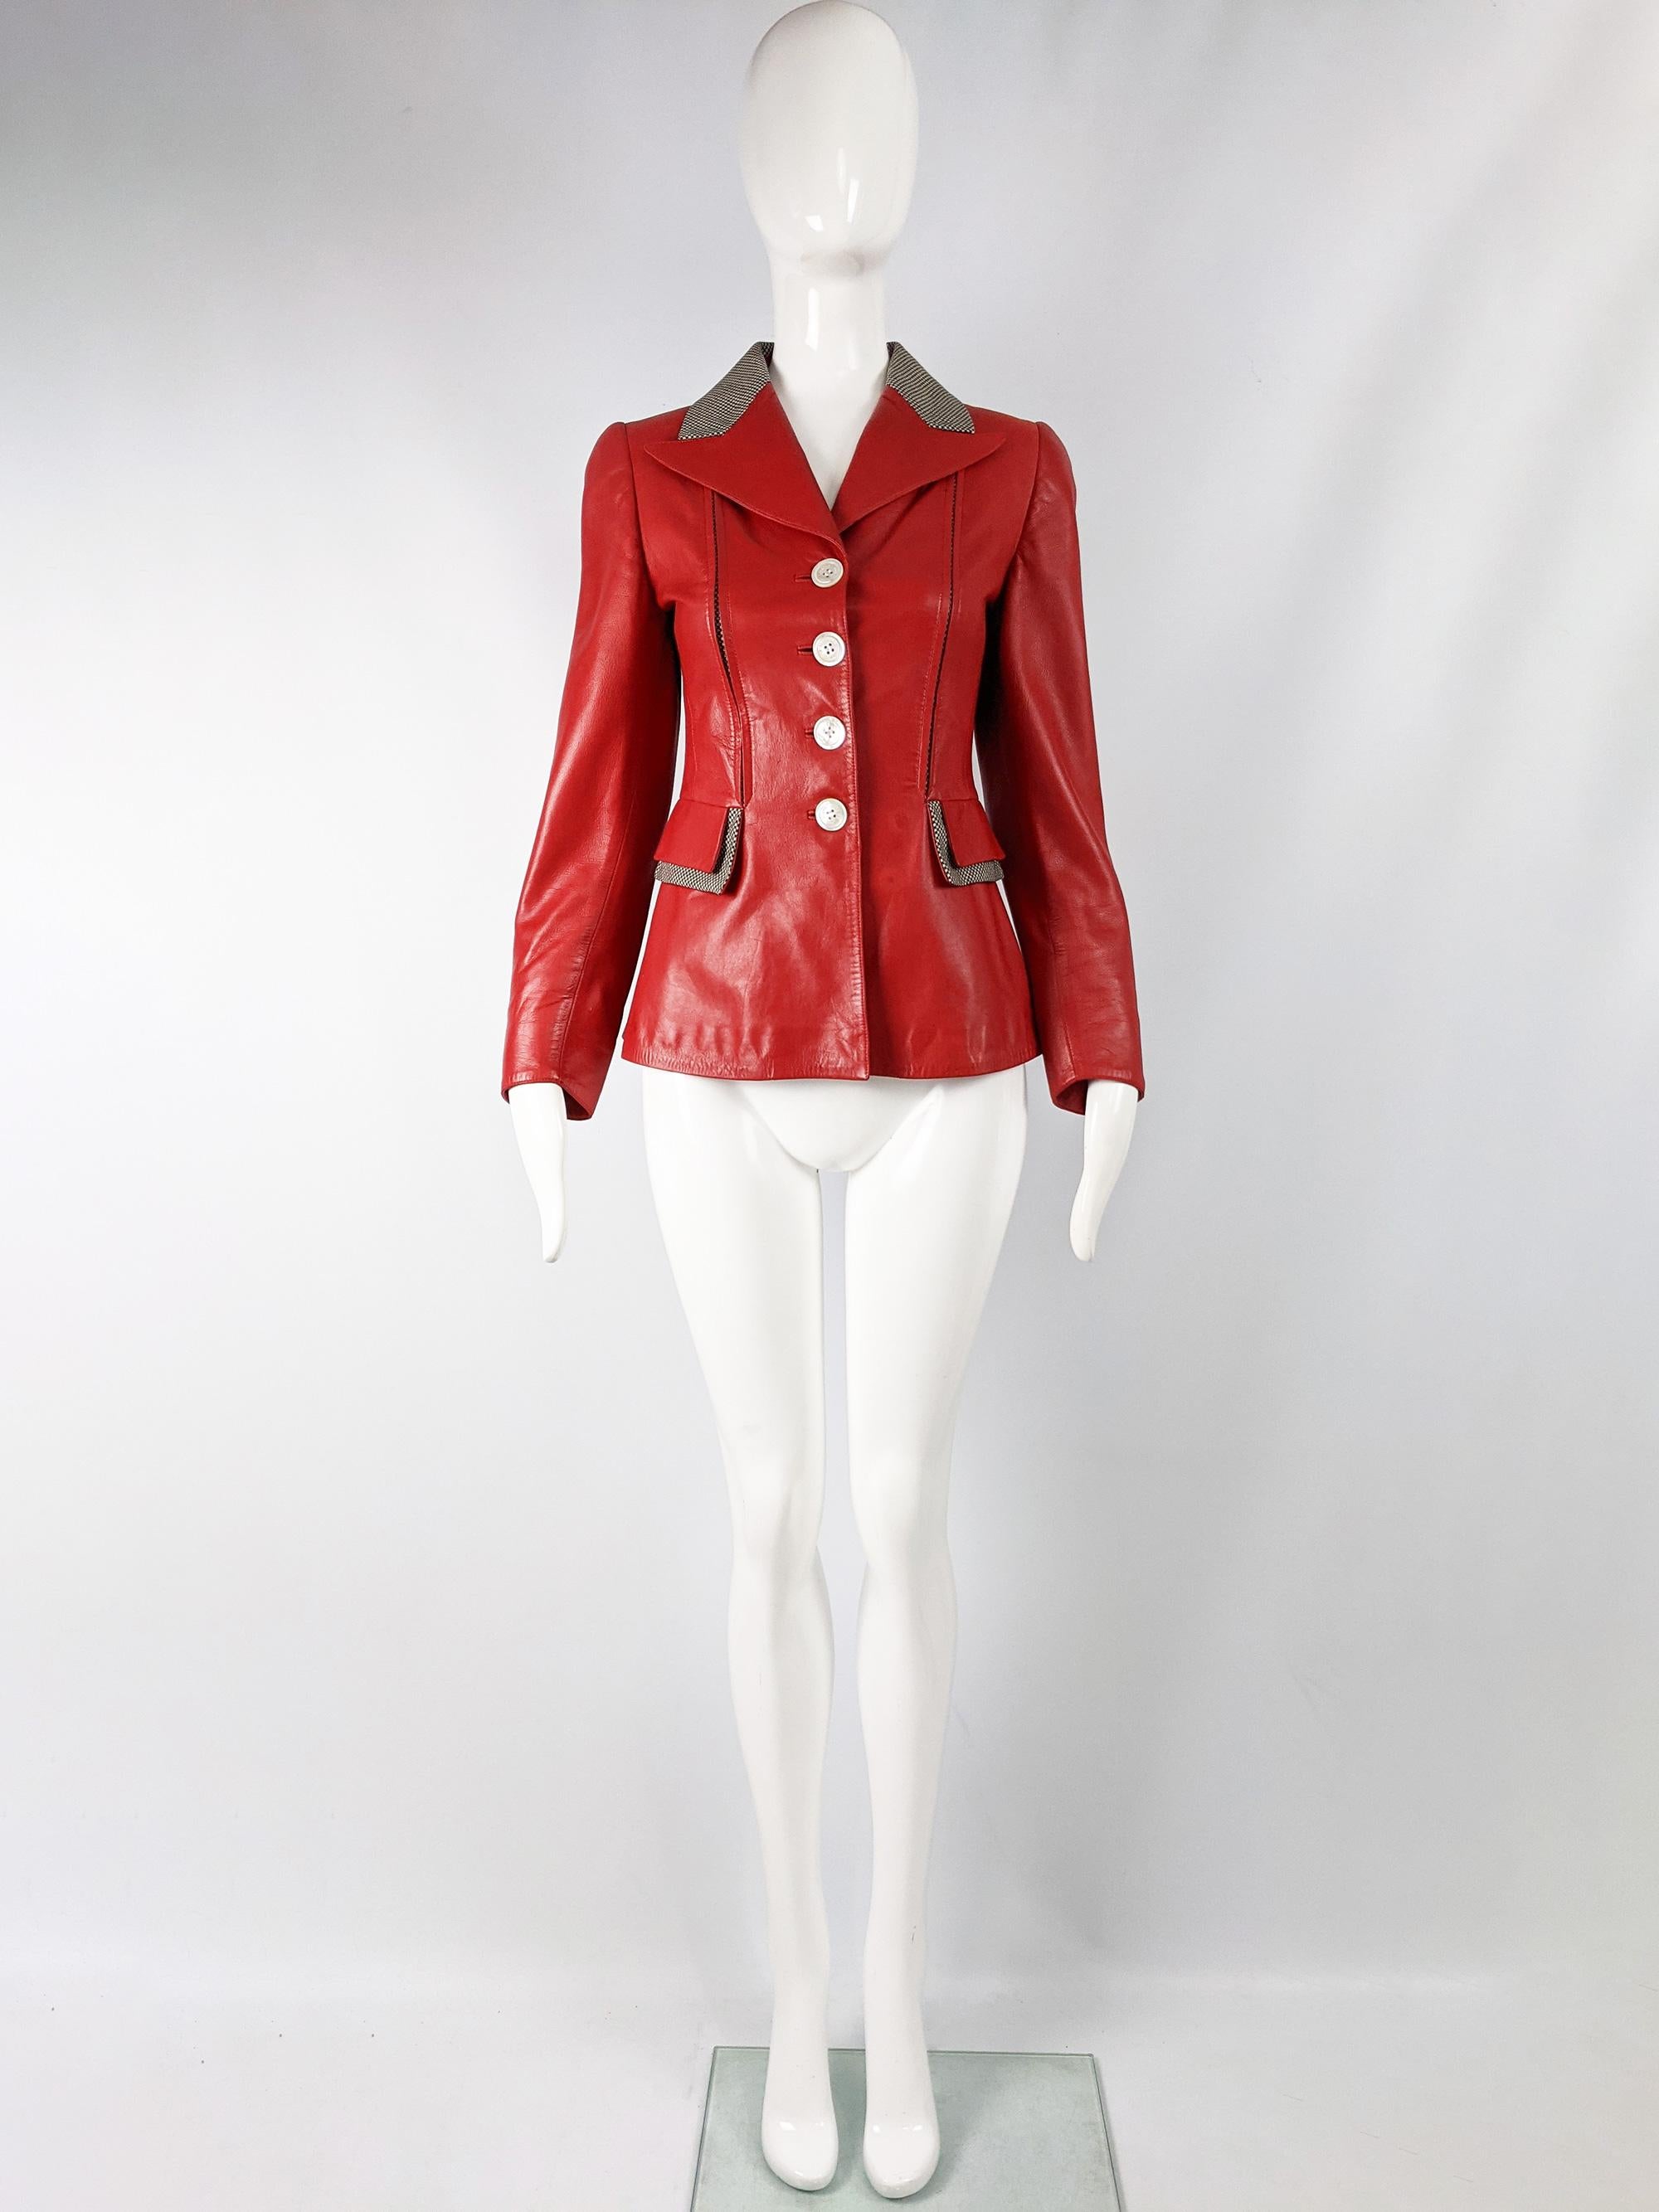 An amazing vintage womens leather jacket from the 80s by luxury Spanish fashion house, Loewe. In a bold red leather with a black and white houndstooth patterned wool. 

Size: Marked vintage 38 but fits more like a modern UK 6-8/ US 2-4/ EU 34-36.